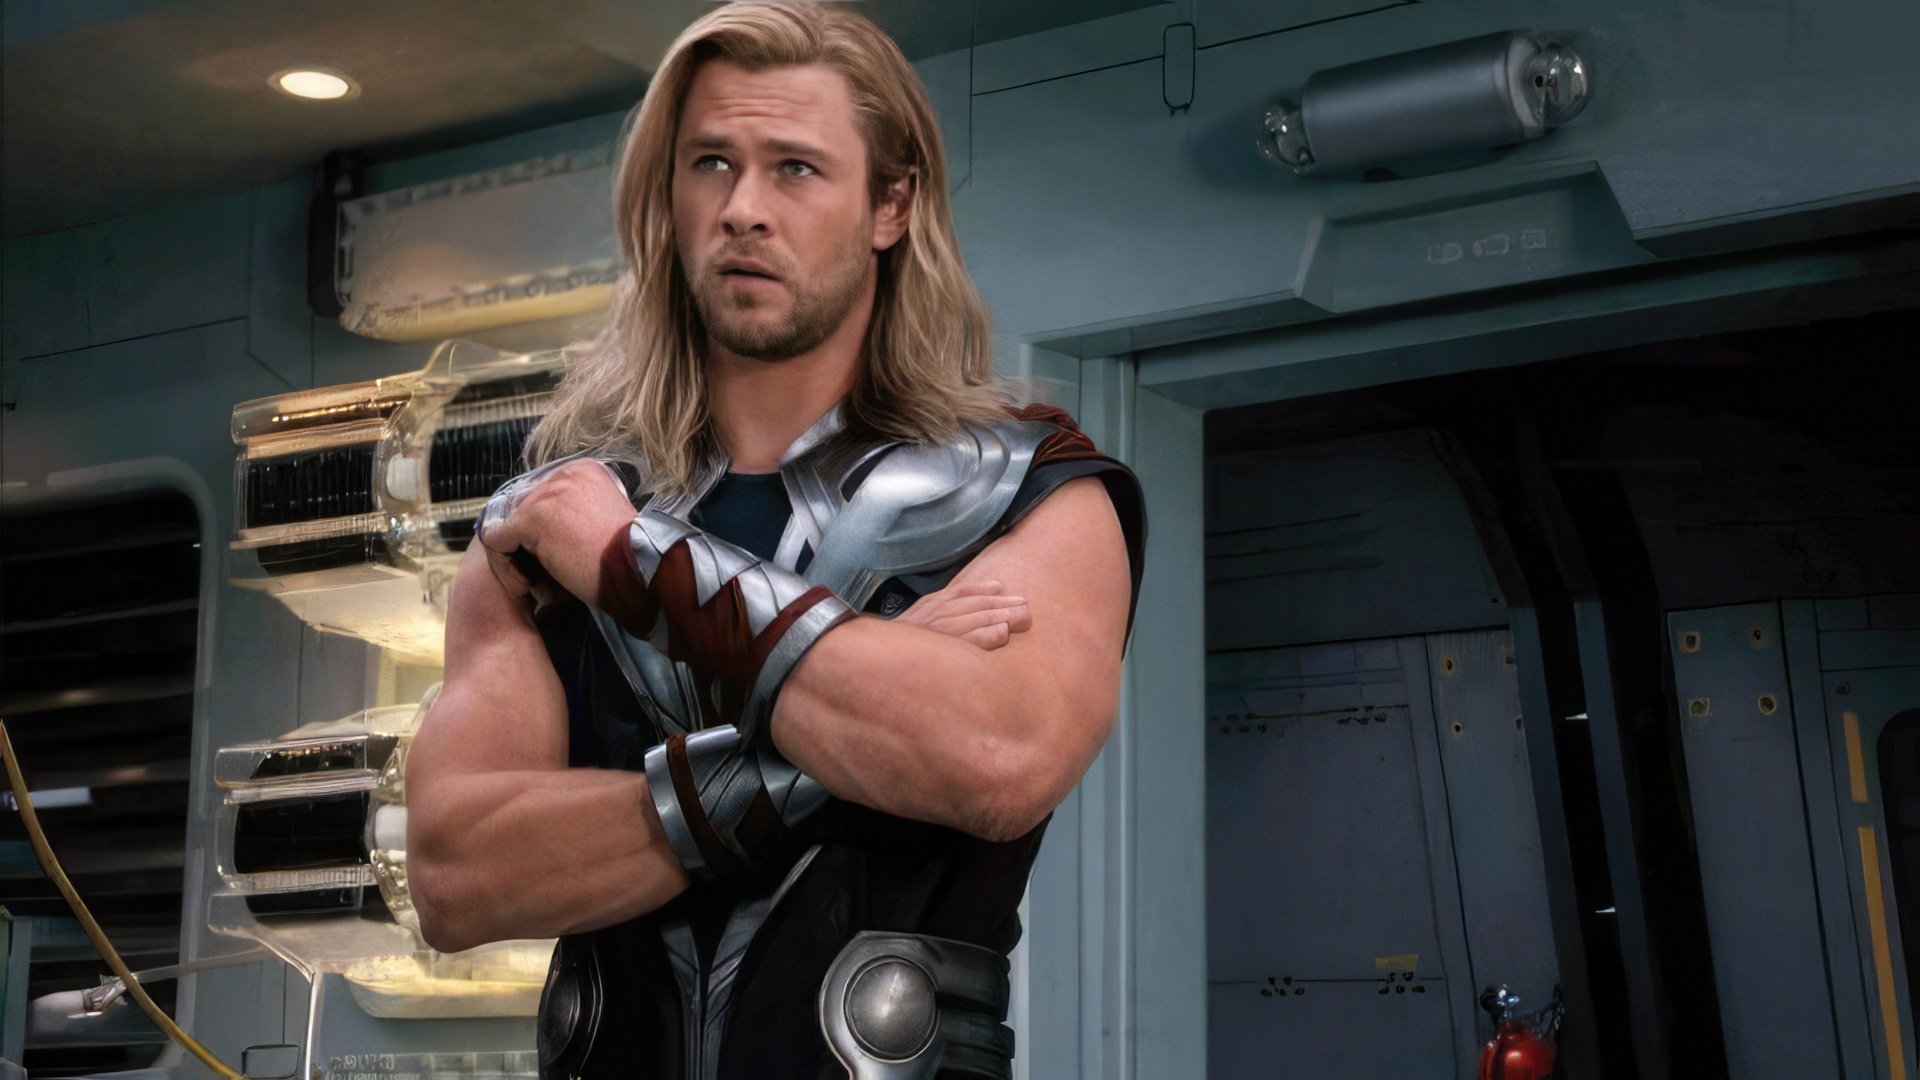 In 2012 Thor joined Avengers’ crew